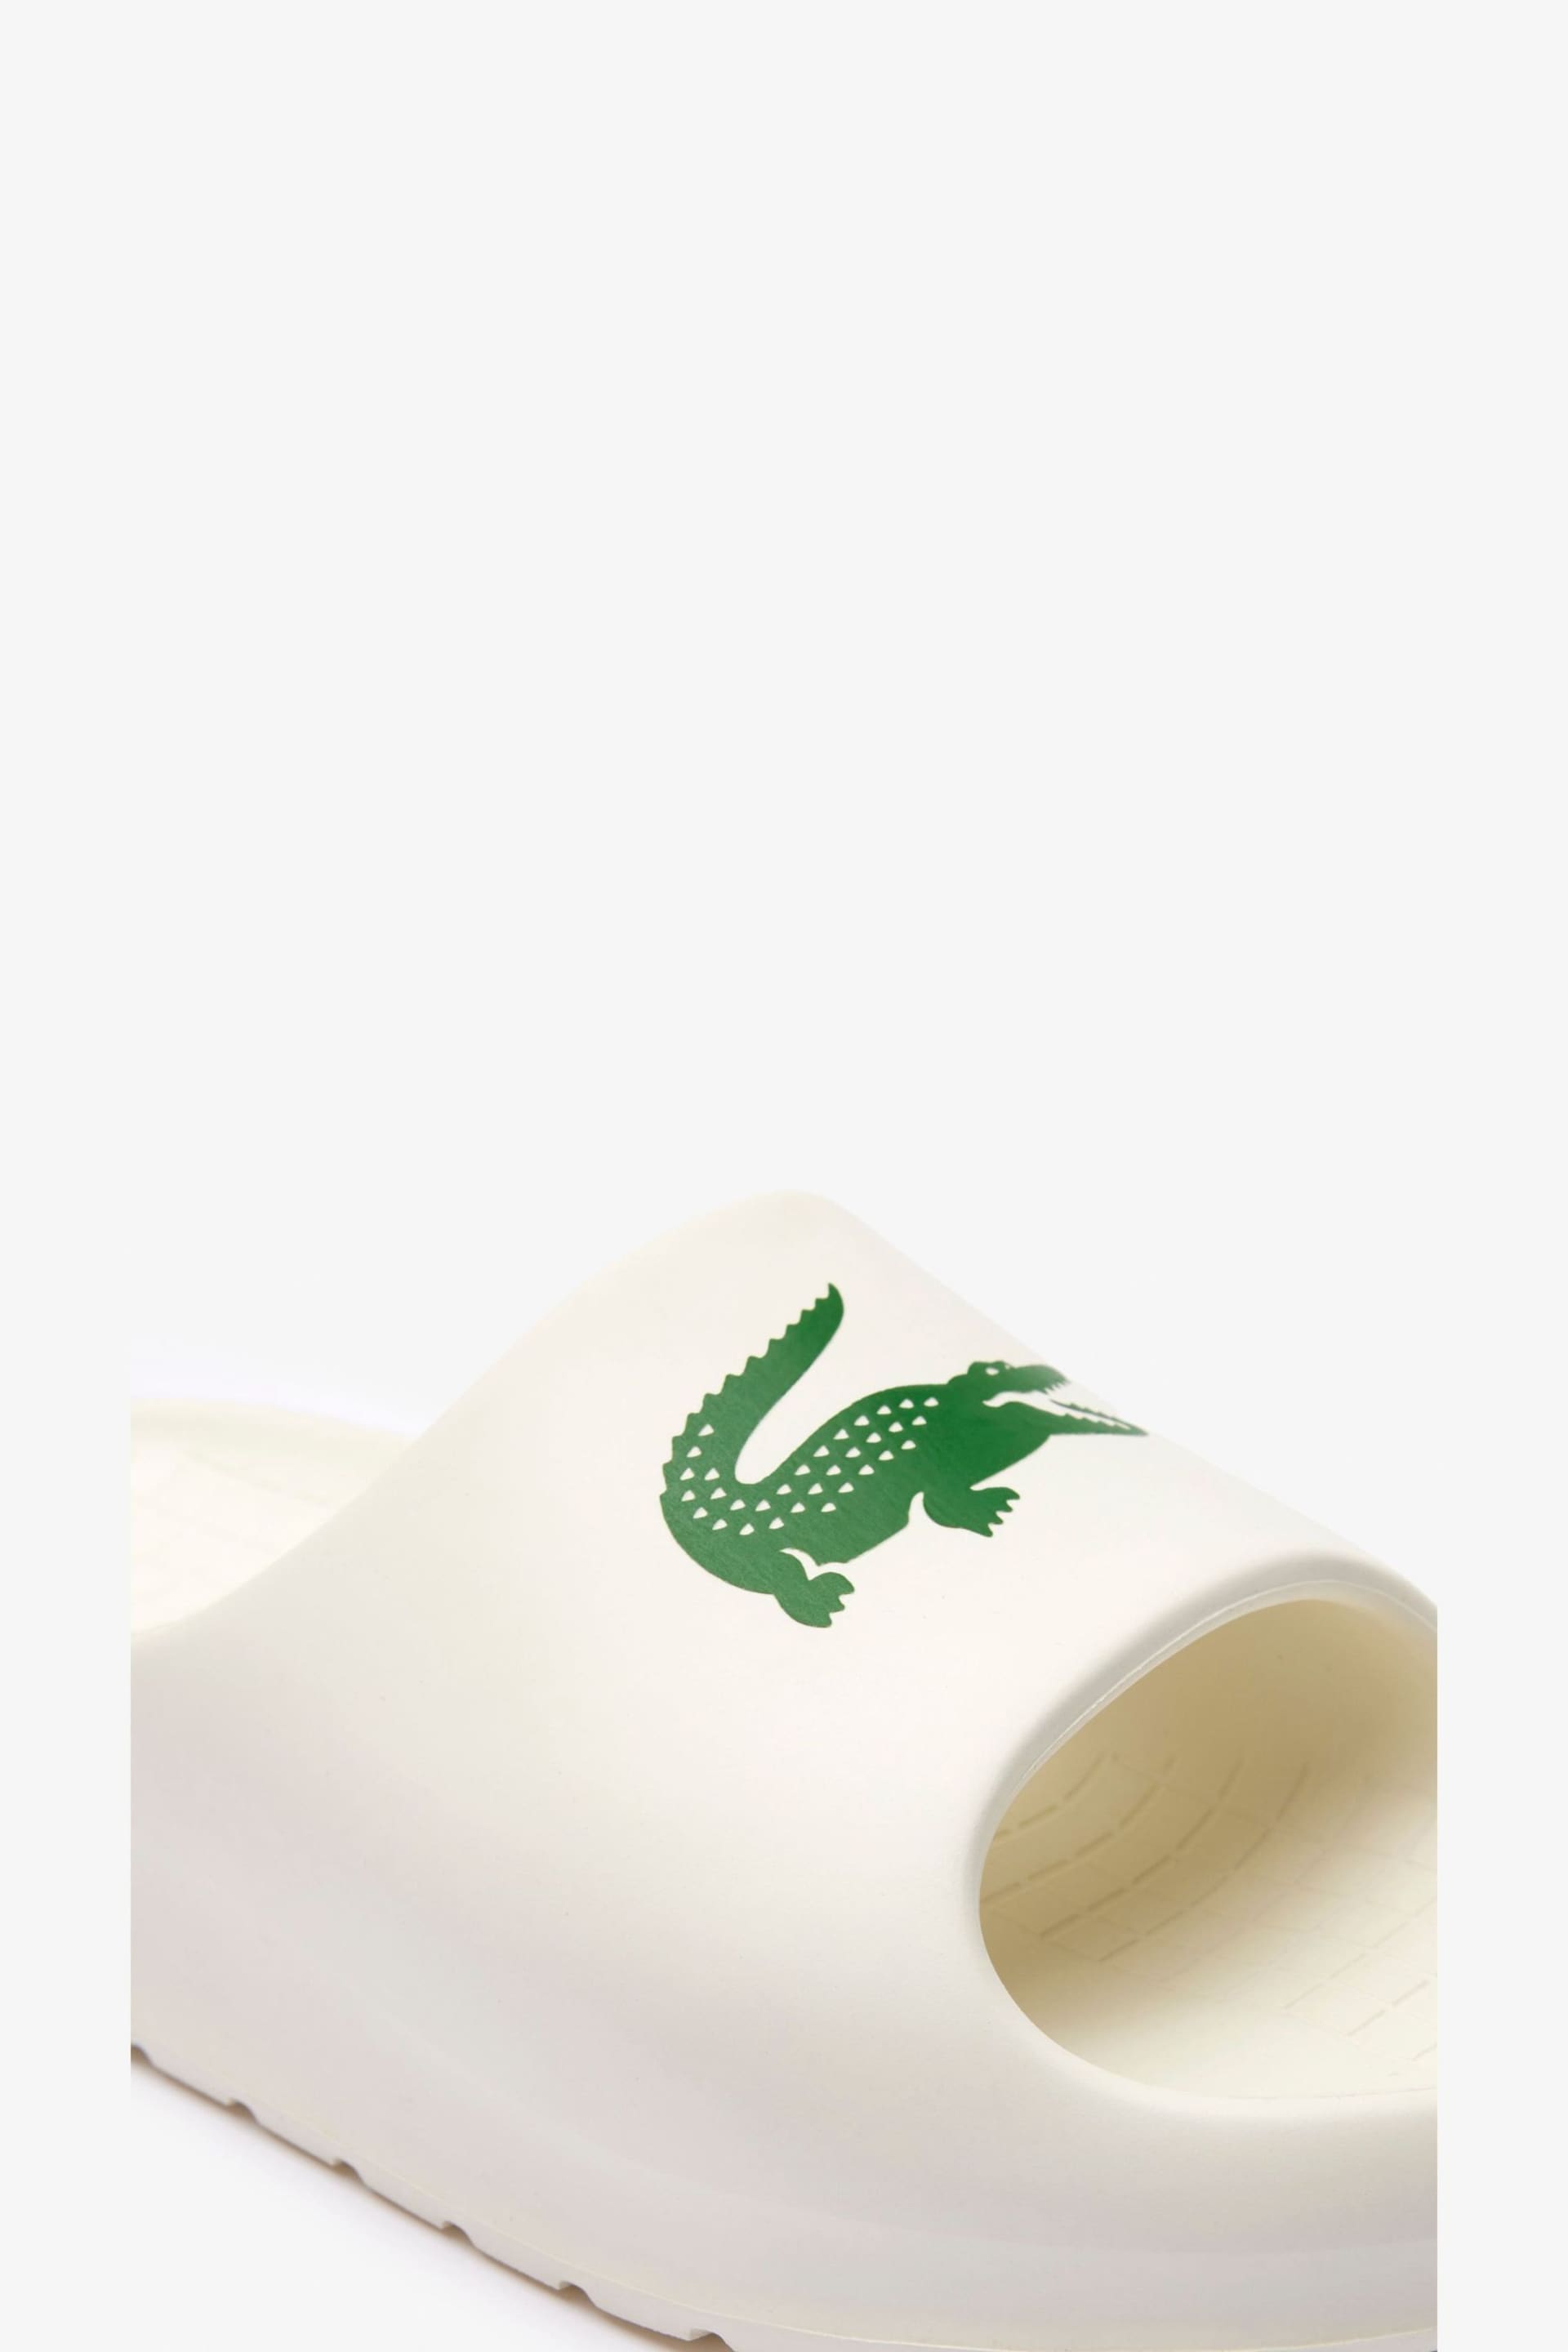 Lacoste Womens Serve Slide White Sandals - Image 7 of 8